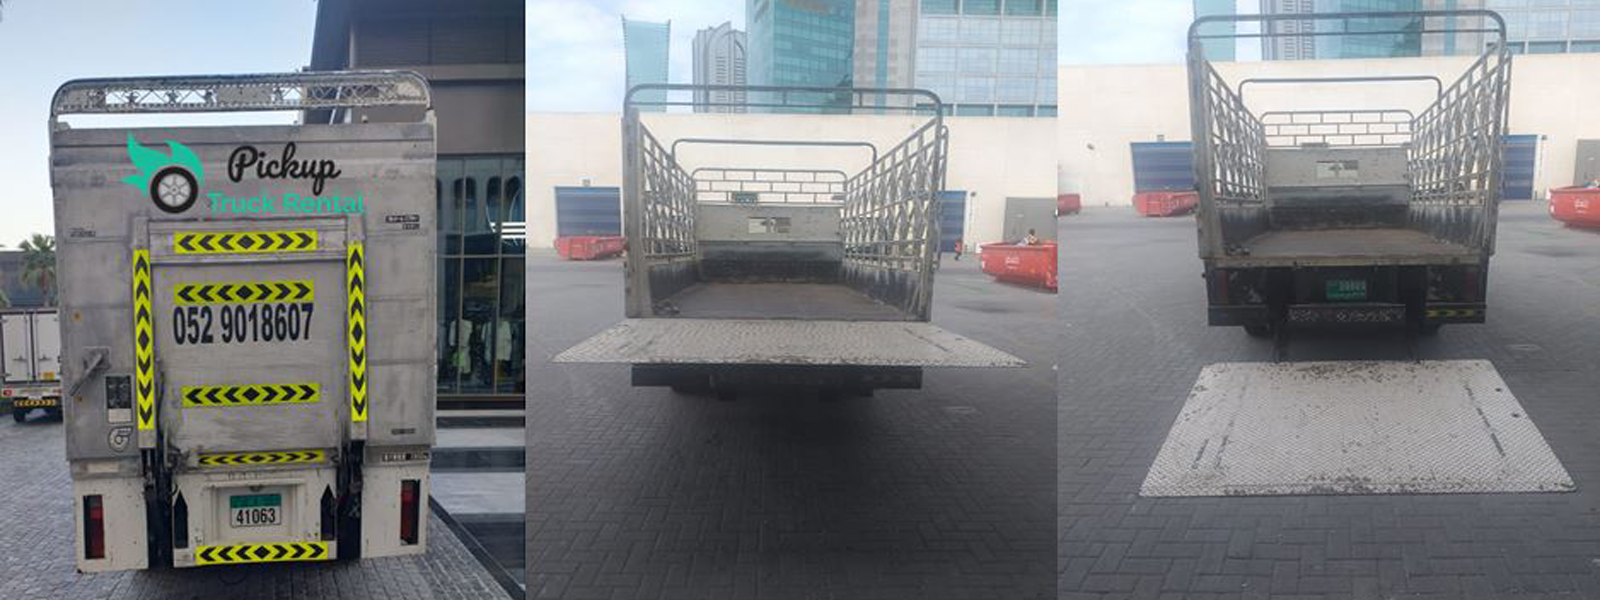 7 TON PICKUP TRUCK UAE Rental With Lifter